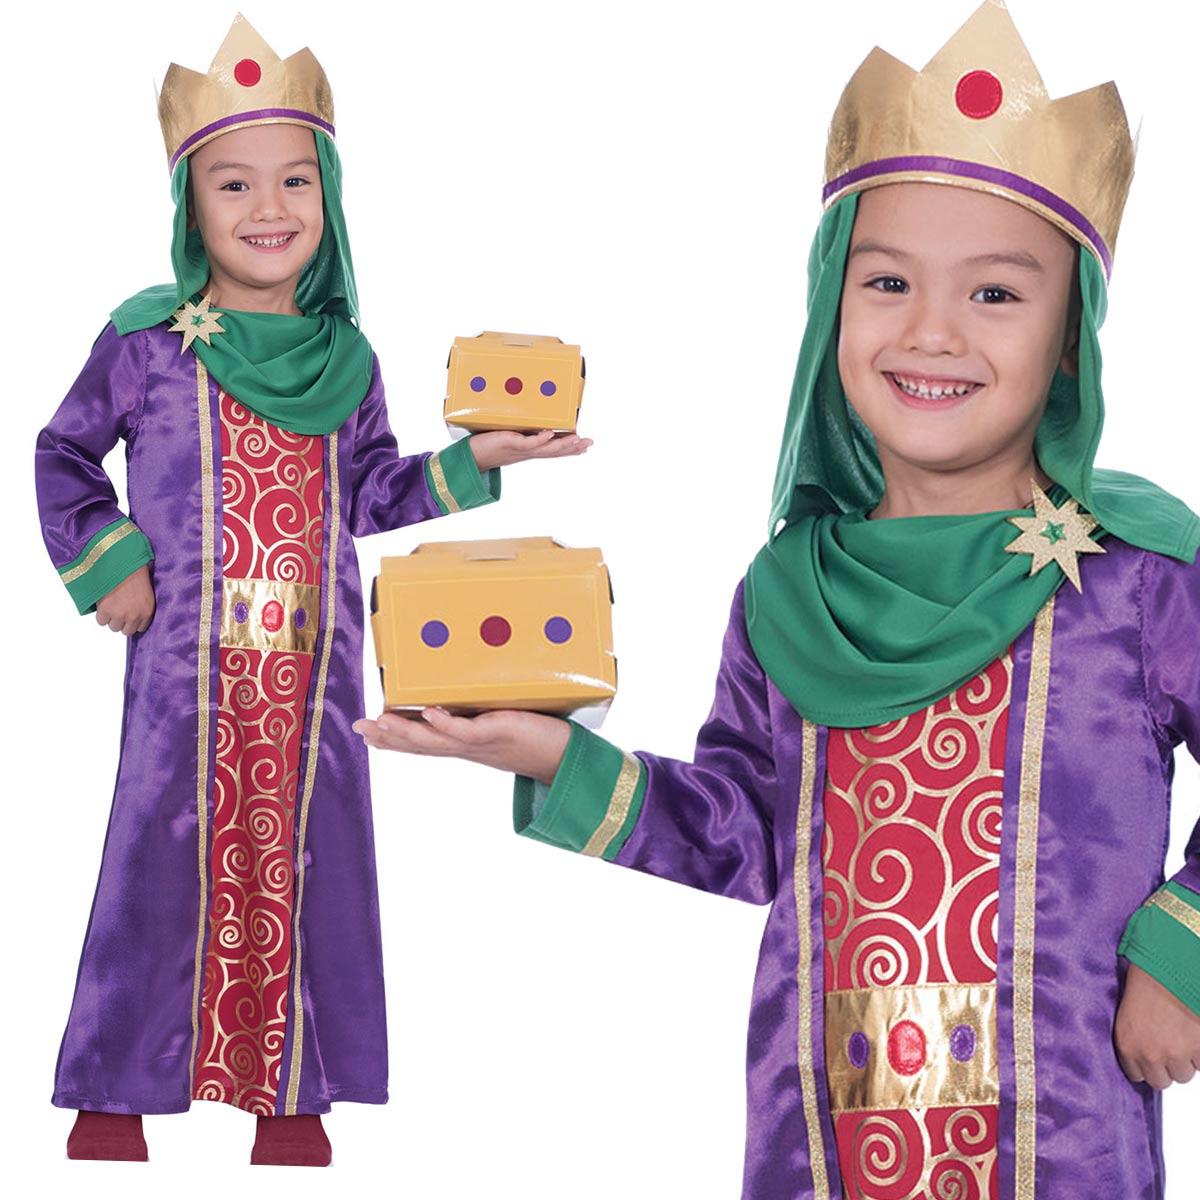 Nativity King Fancy Dress Costume for Children by Amscan 9904074 / 9904075 / 9904076 / 9904077 available here at Karnival Costumes online party shop